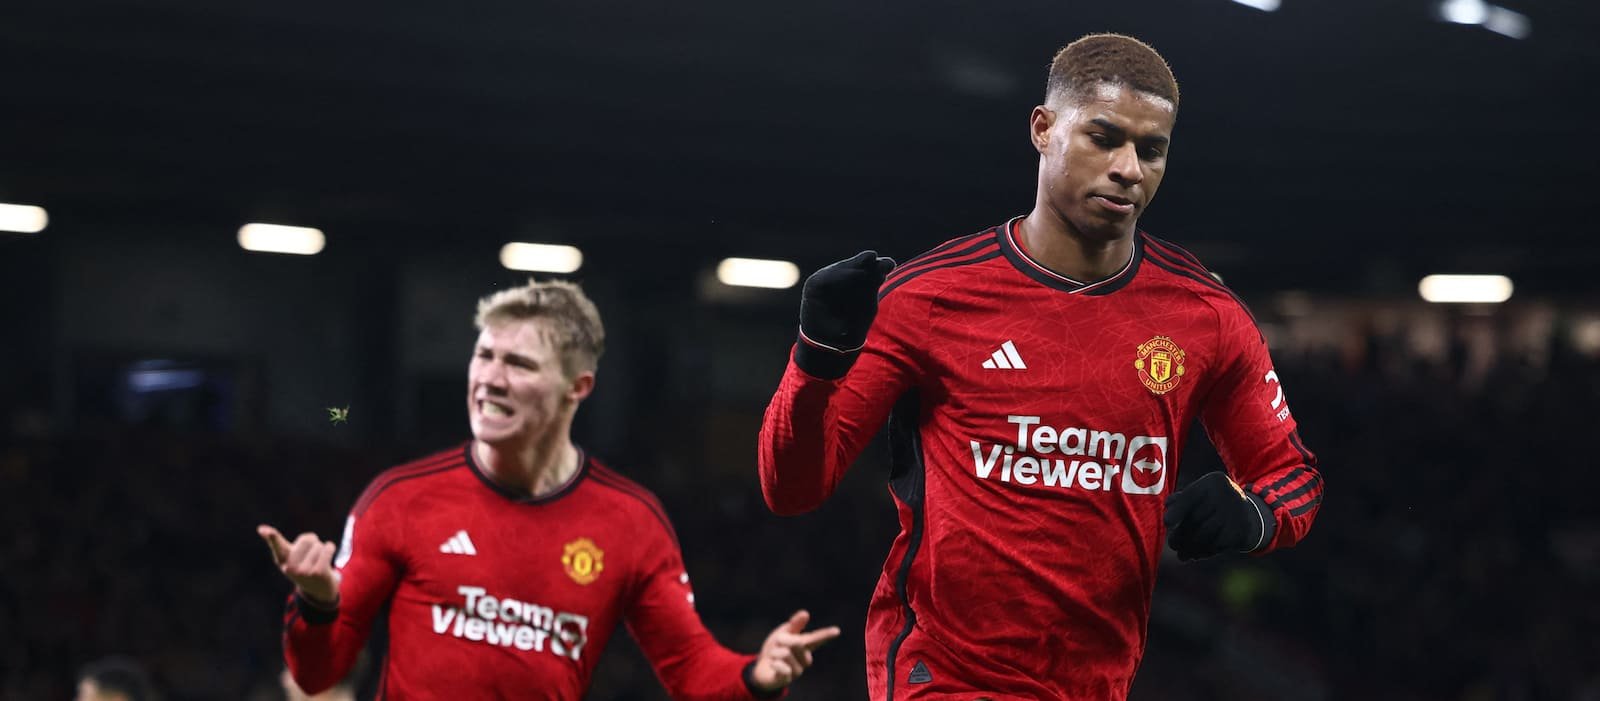 “Certain lines get crossed”: Defiant Marcus Rashford hits out at media for unfair criticism – Man United News And Transfer News